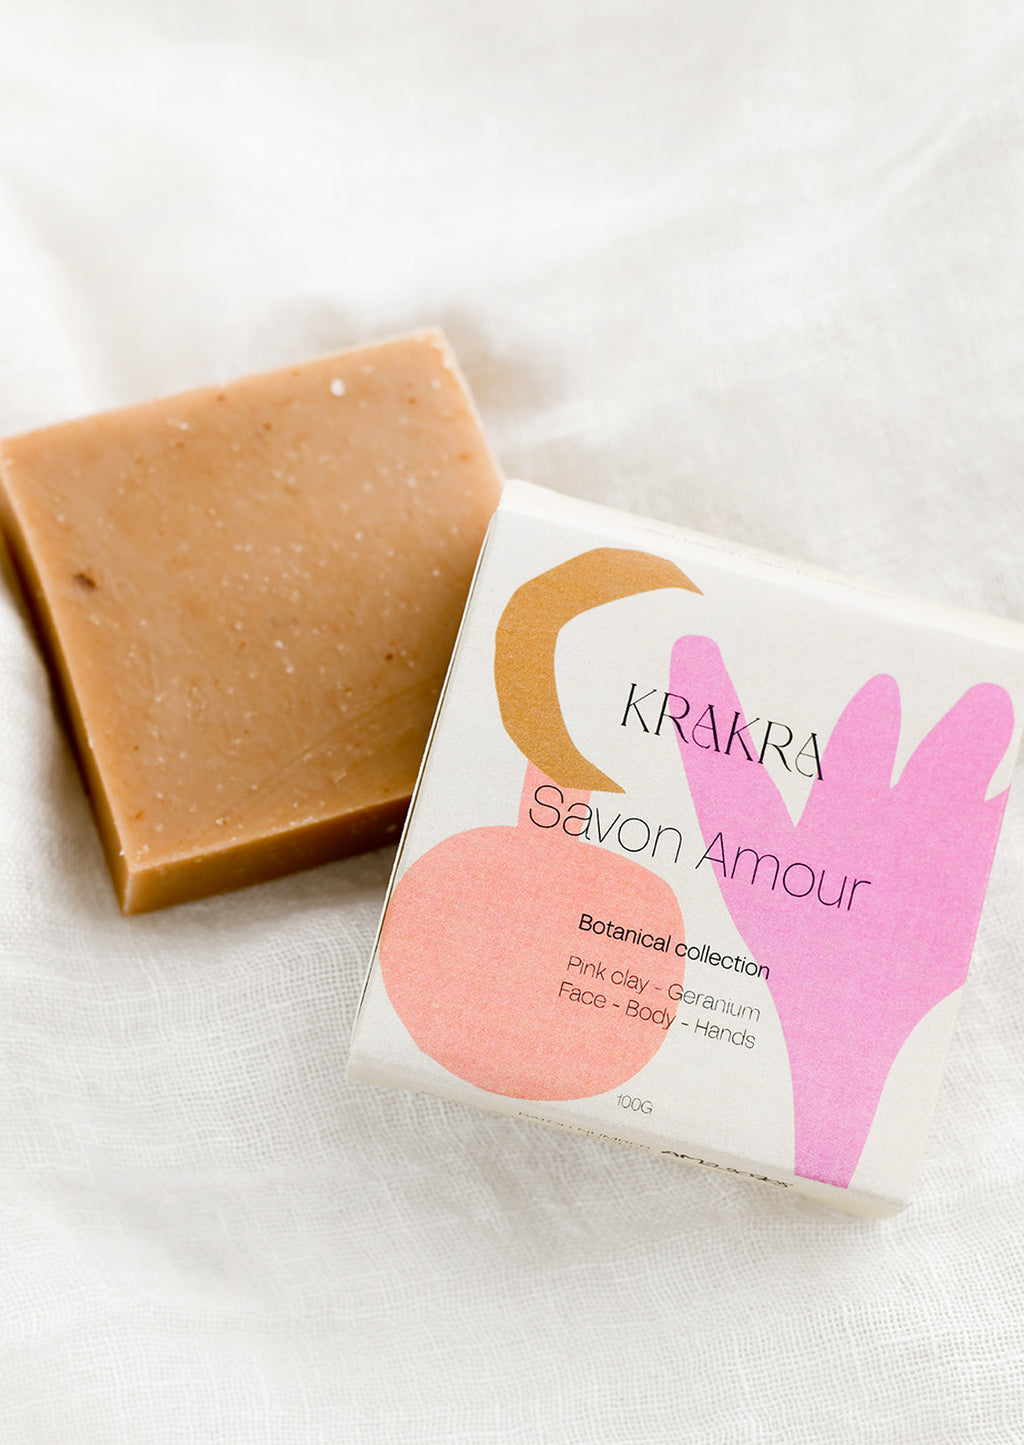 Amour: A bar soap in pink clay with geranium scent.